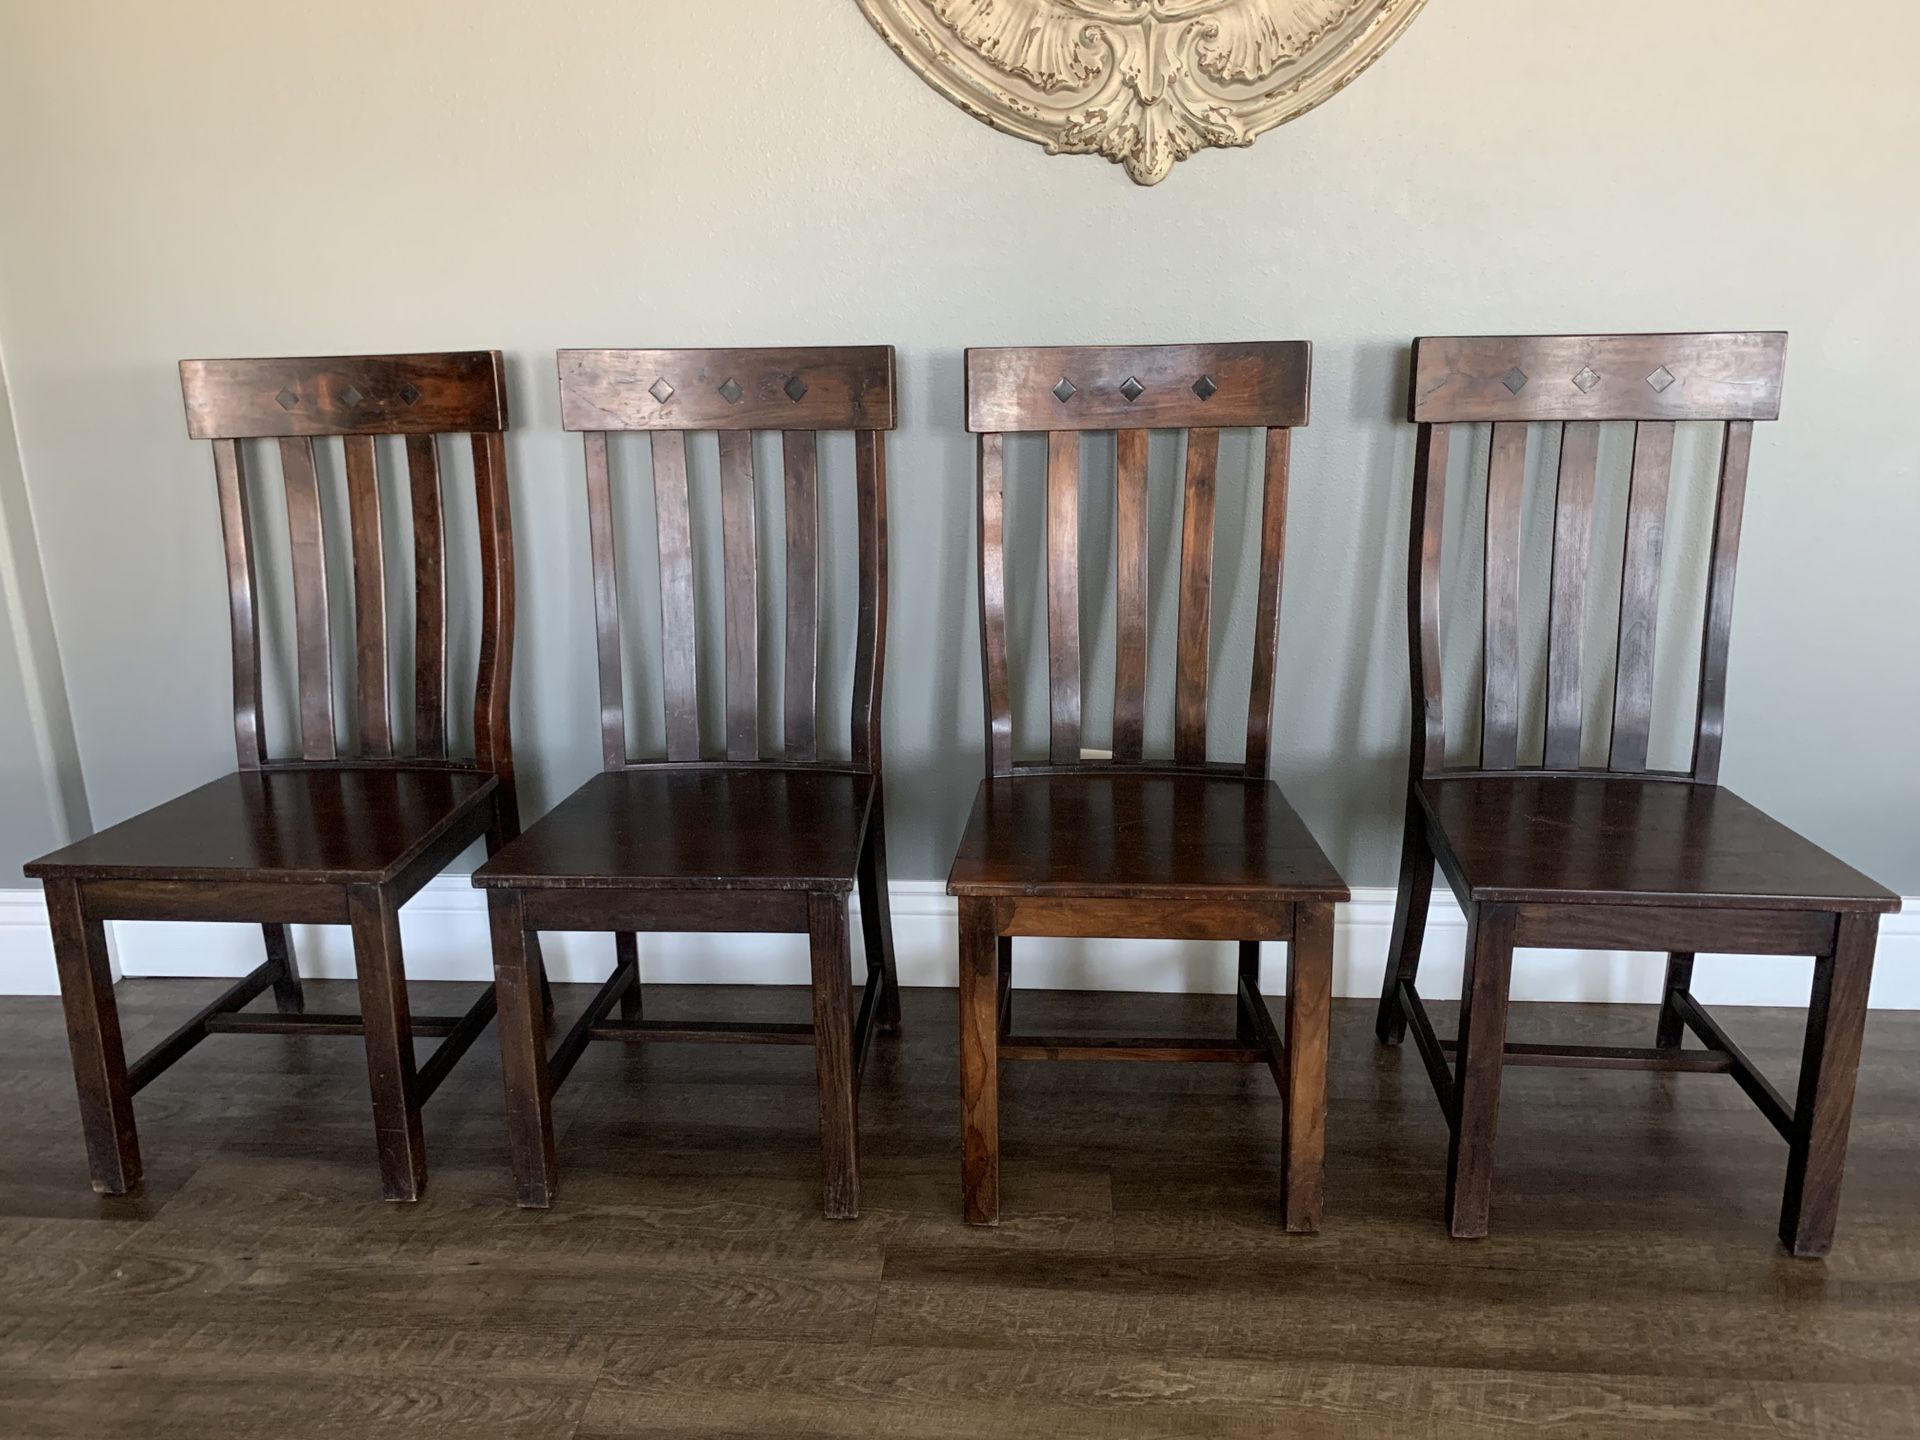 FOUR SOLID DARK WOOD DINING CHAIRS